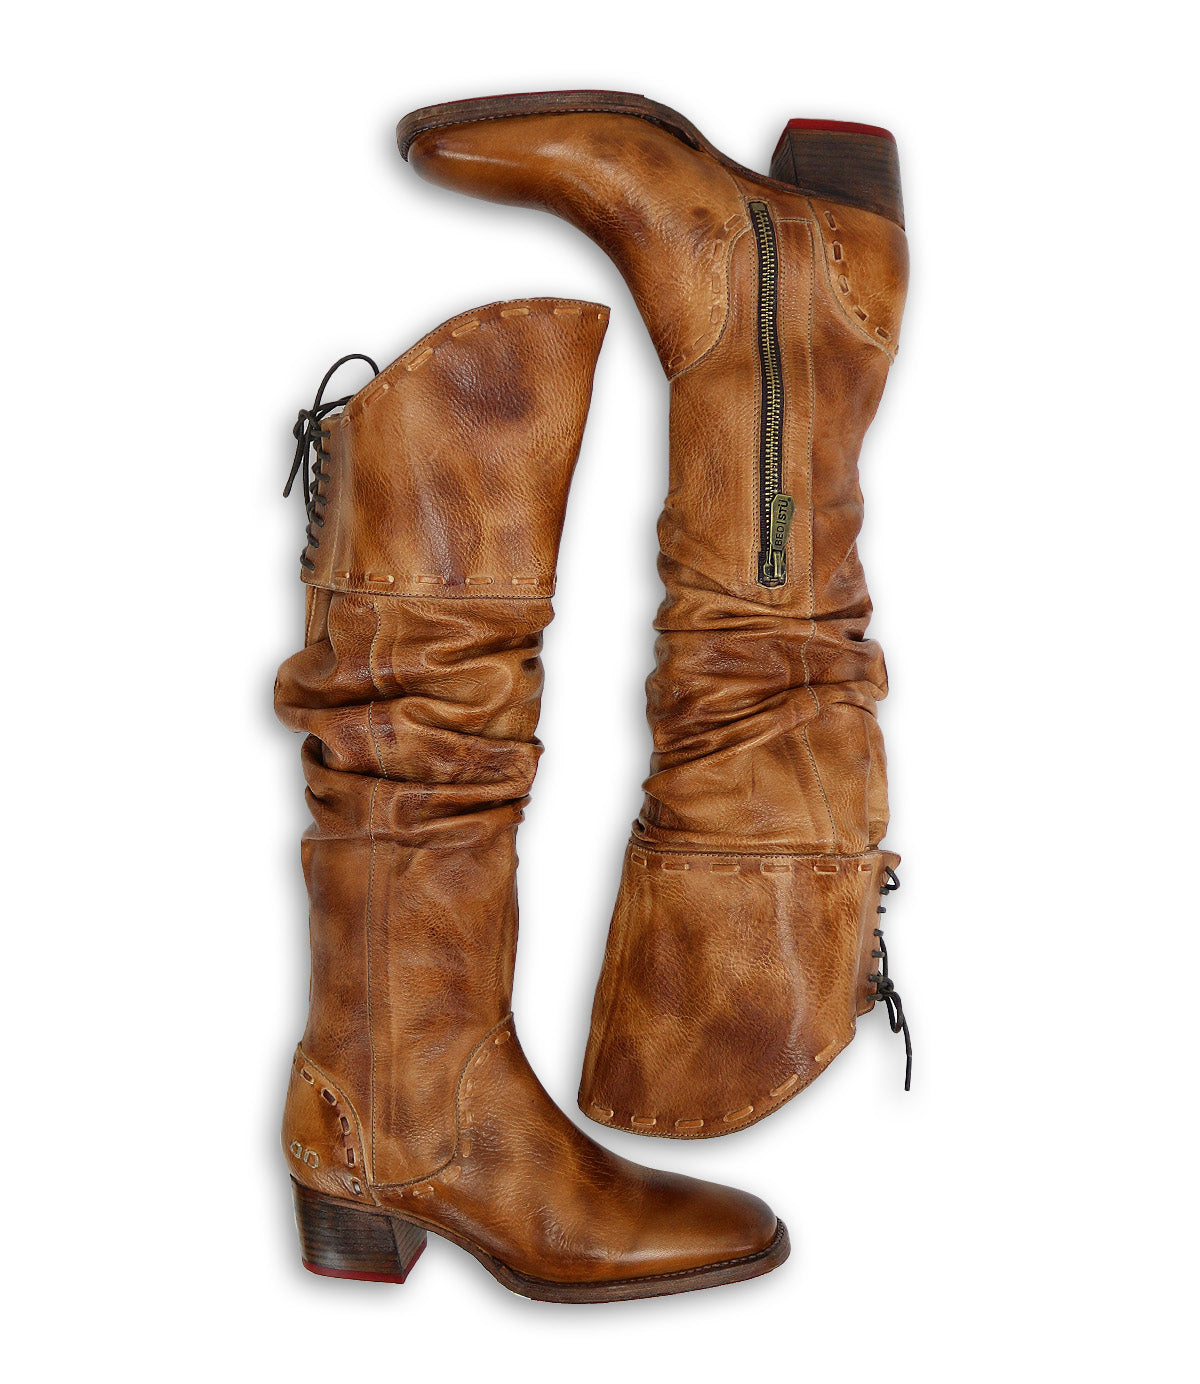 A pair of Leilani women's brown leather boots by Bed Stu.